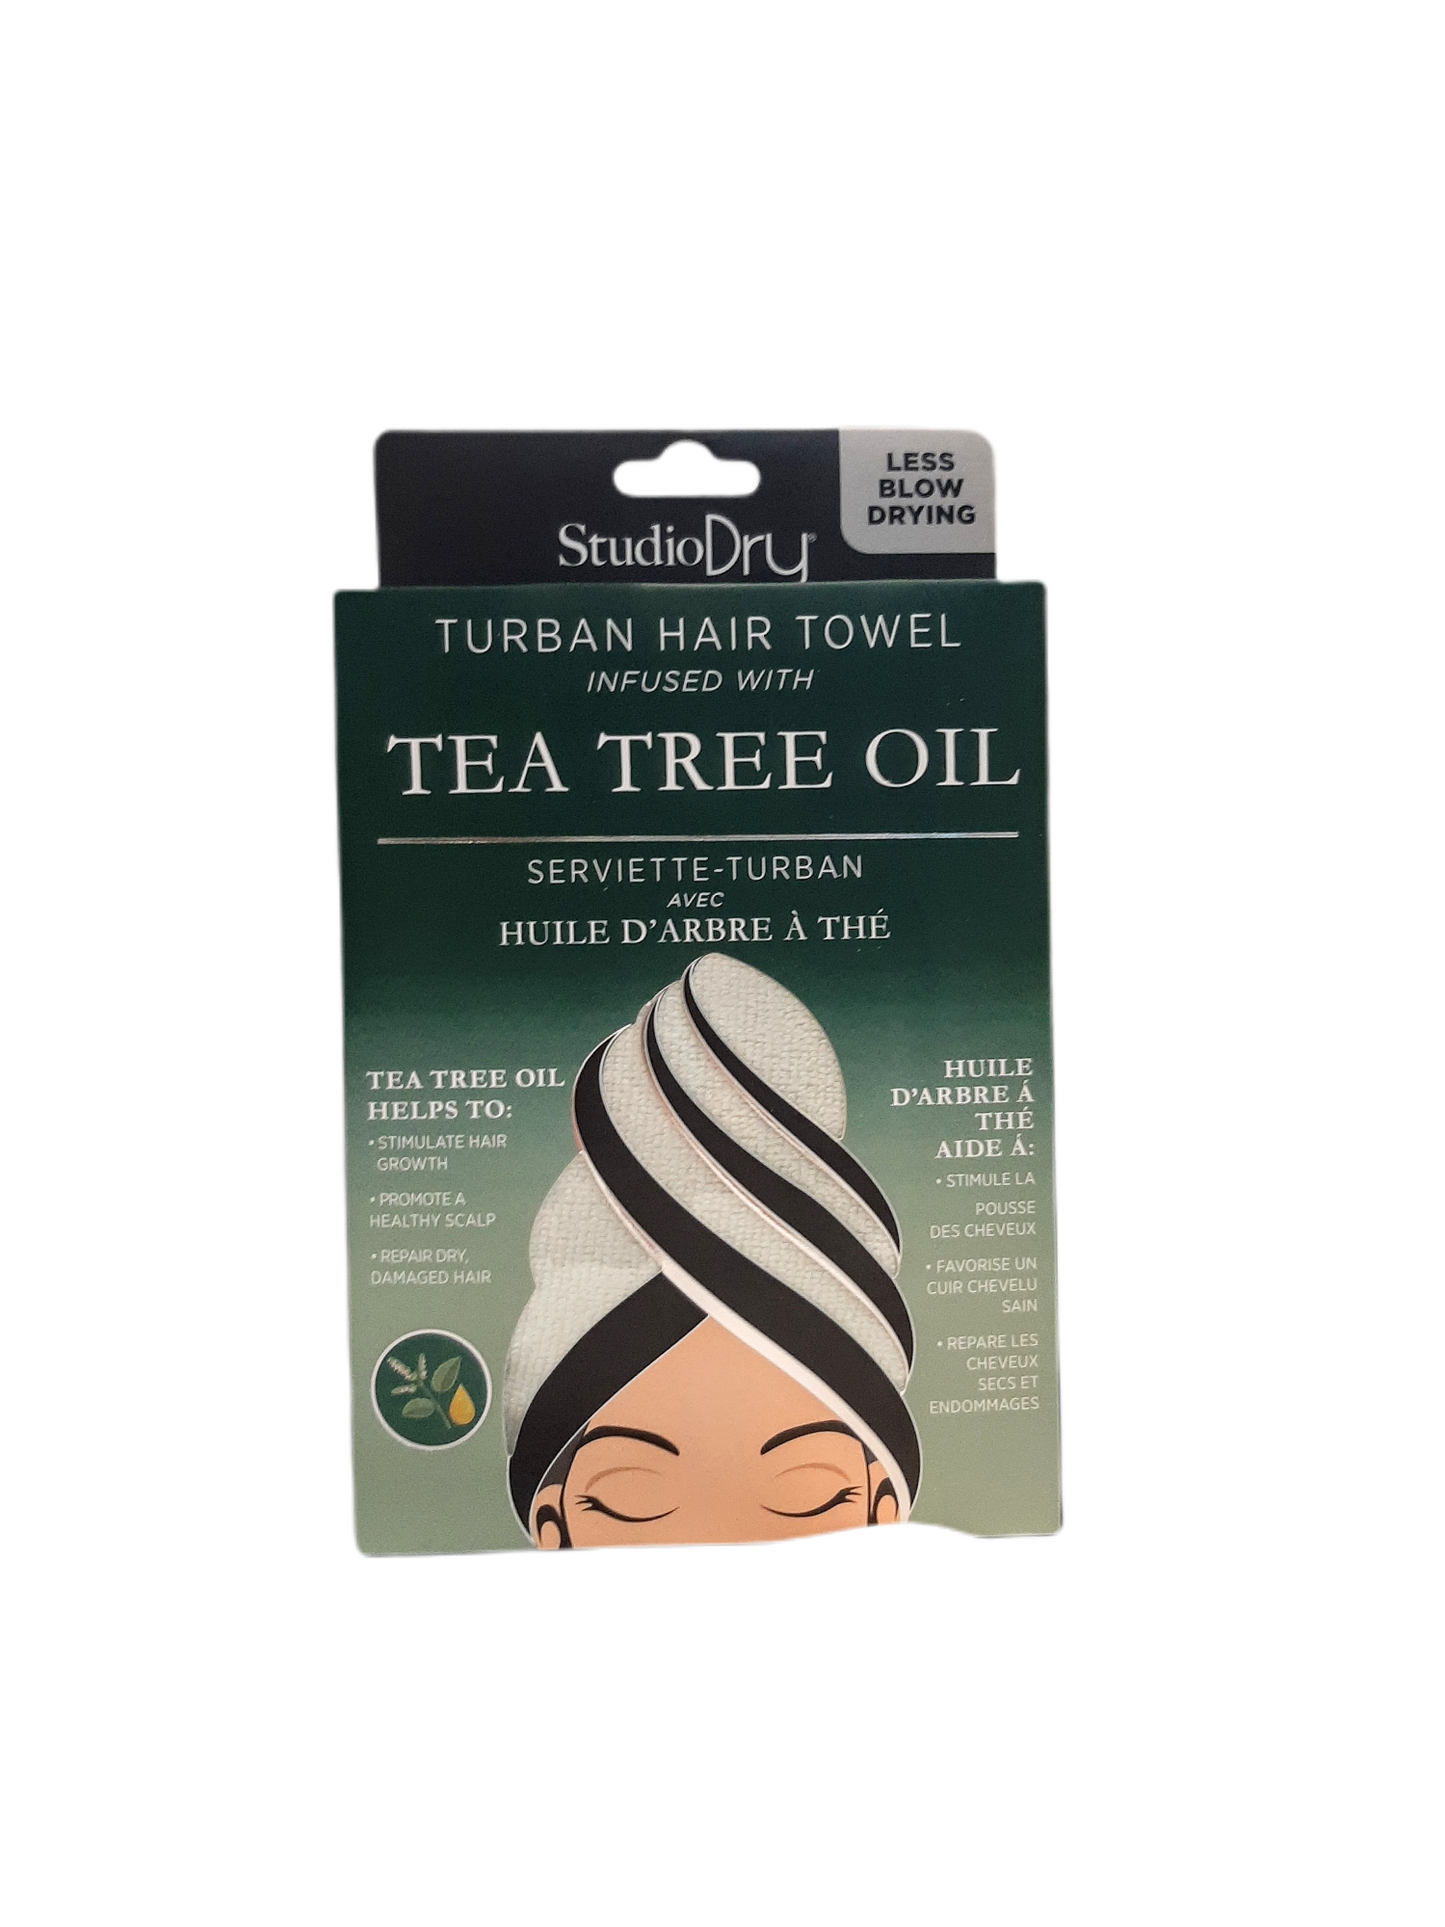 SAVE YOUR HAIR!  Using a regular cotton towel is harsh on locks and can lead to breakage and frizz.  Our gentle microfiber is designed to dry faster than a regular cotton towel, saving time and blow-drying.  Four types to choose from:  Vitamin C Argan Oil Tea Tree Oil Coconut Oil